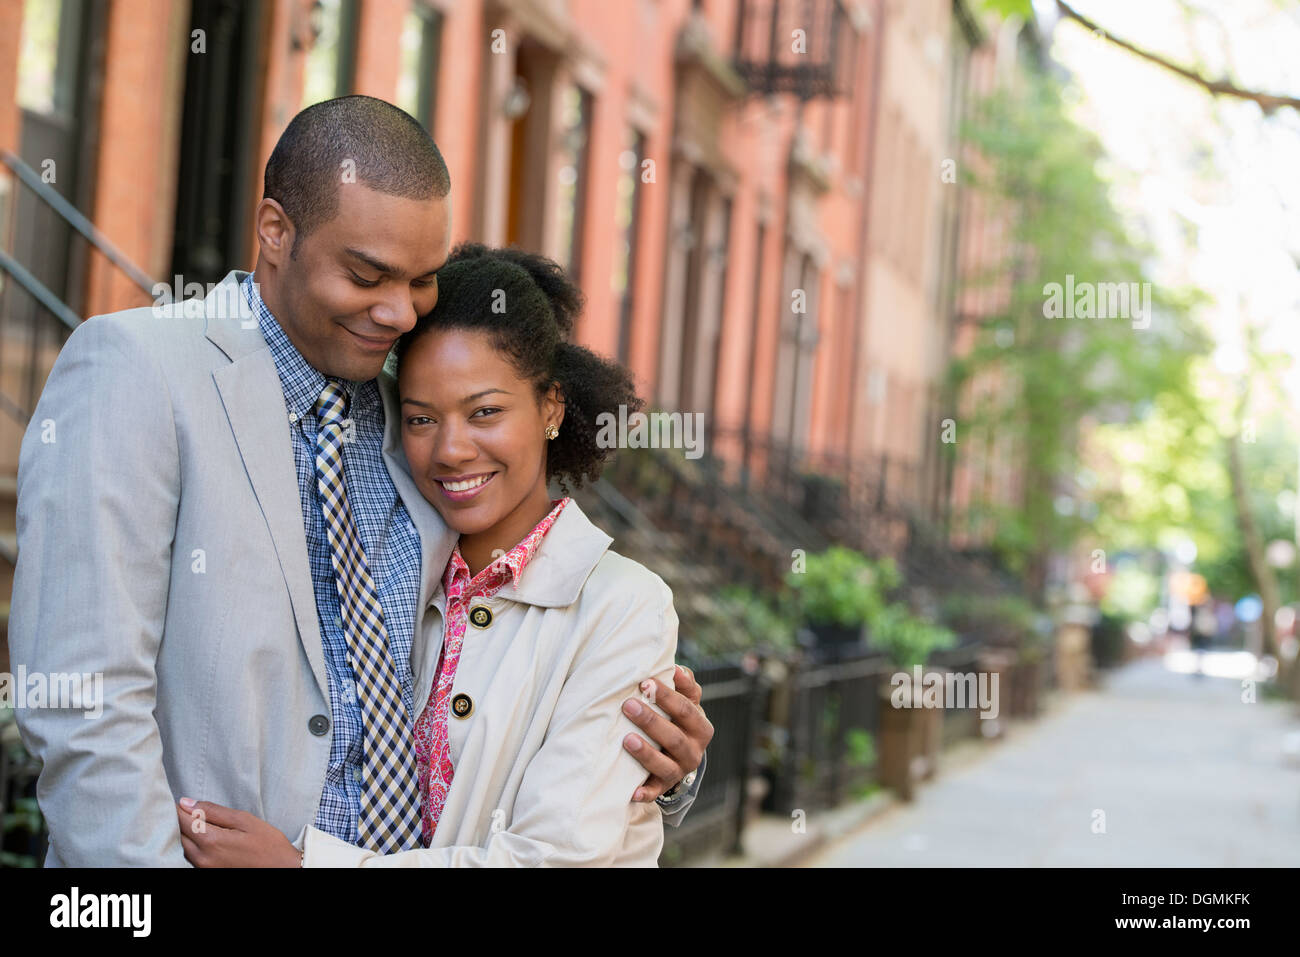 A couple standing side by side on a city street. Stock Photo